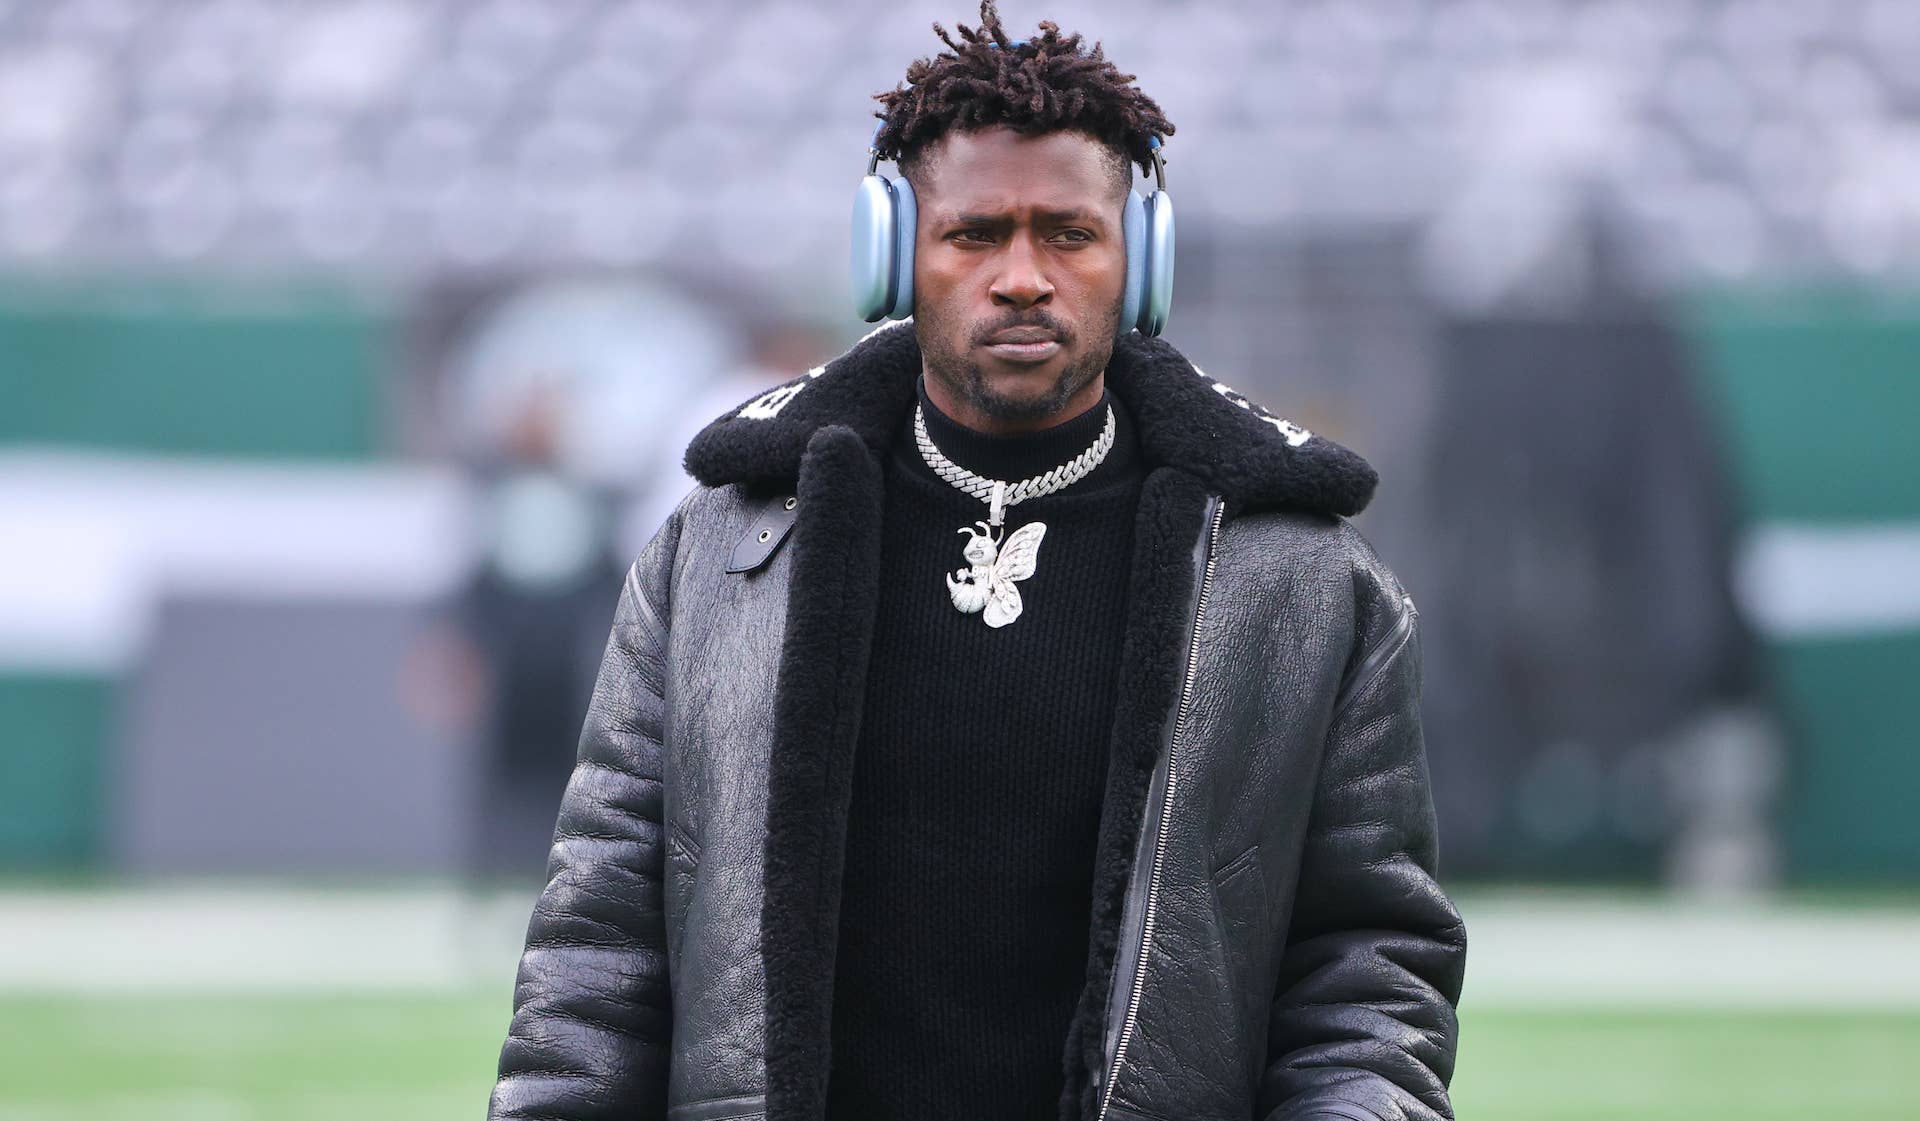 Antonio Brown on the field prior to game against the New York Jets in 2022